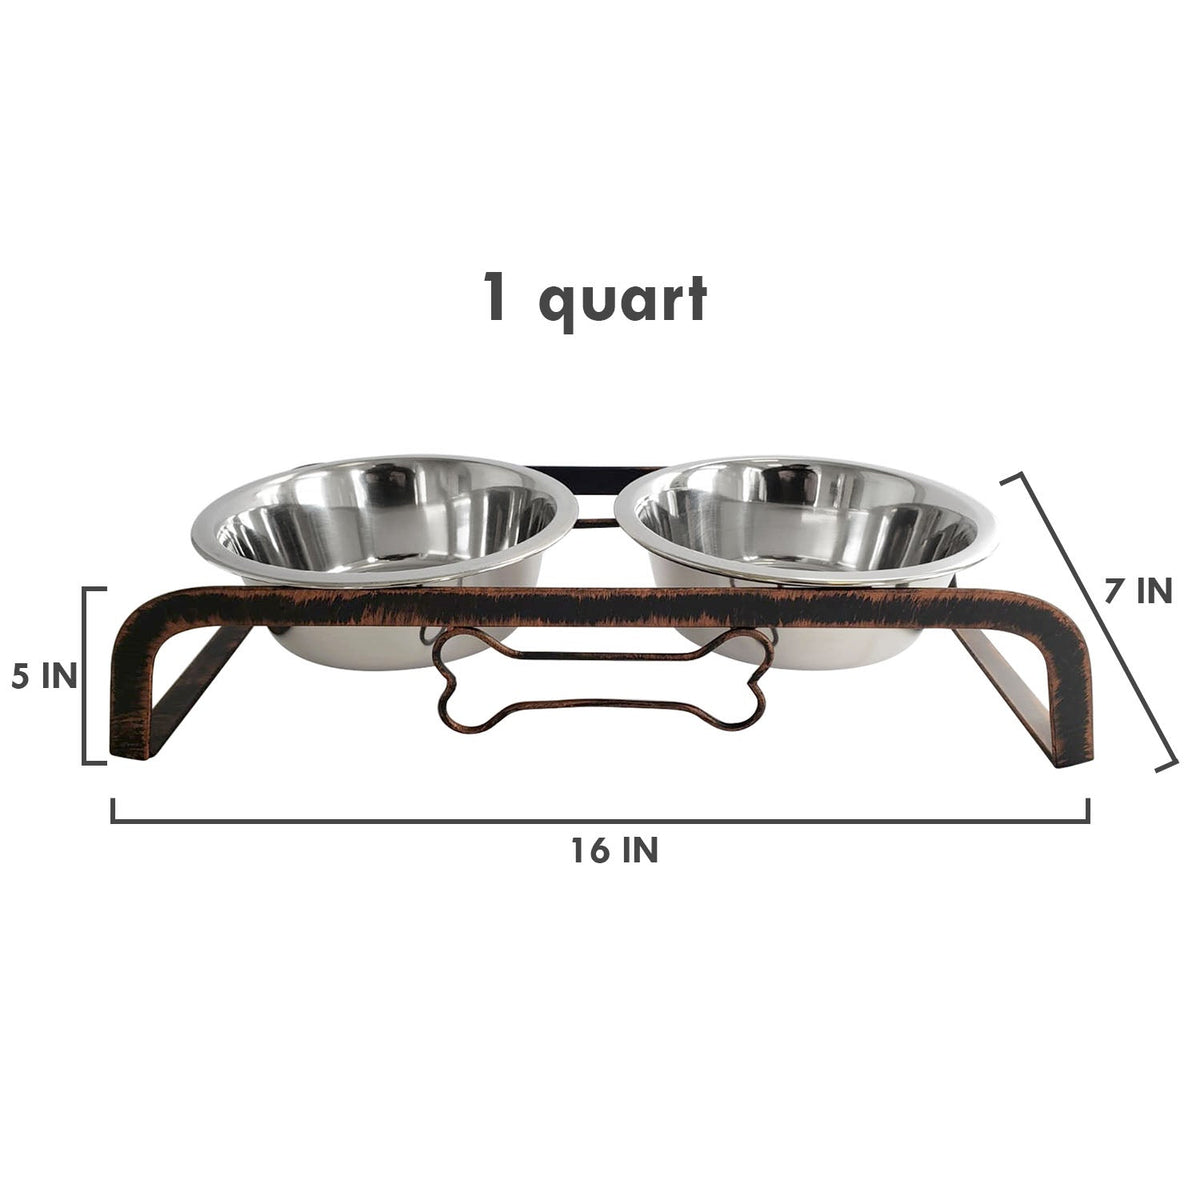 Elevated Rustic Design Dog Bone Feeder with 2 Stainless Steel Bowls by American Pet Supplies